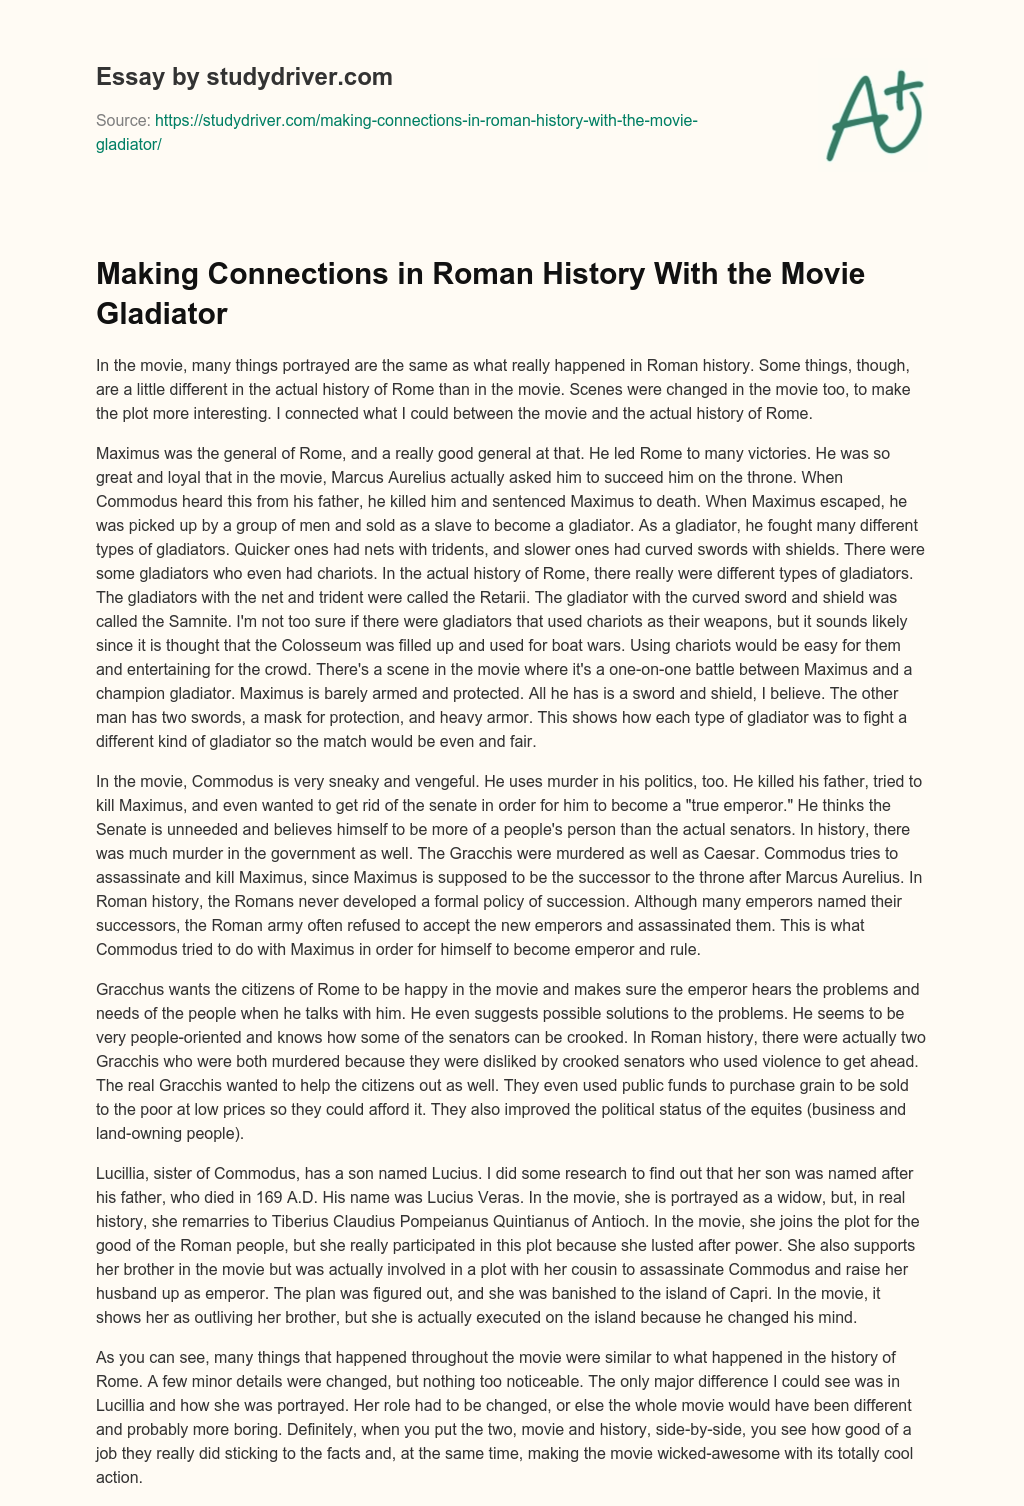 Making Connections in Roman History with the Movie Gladiator essay